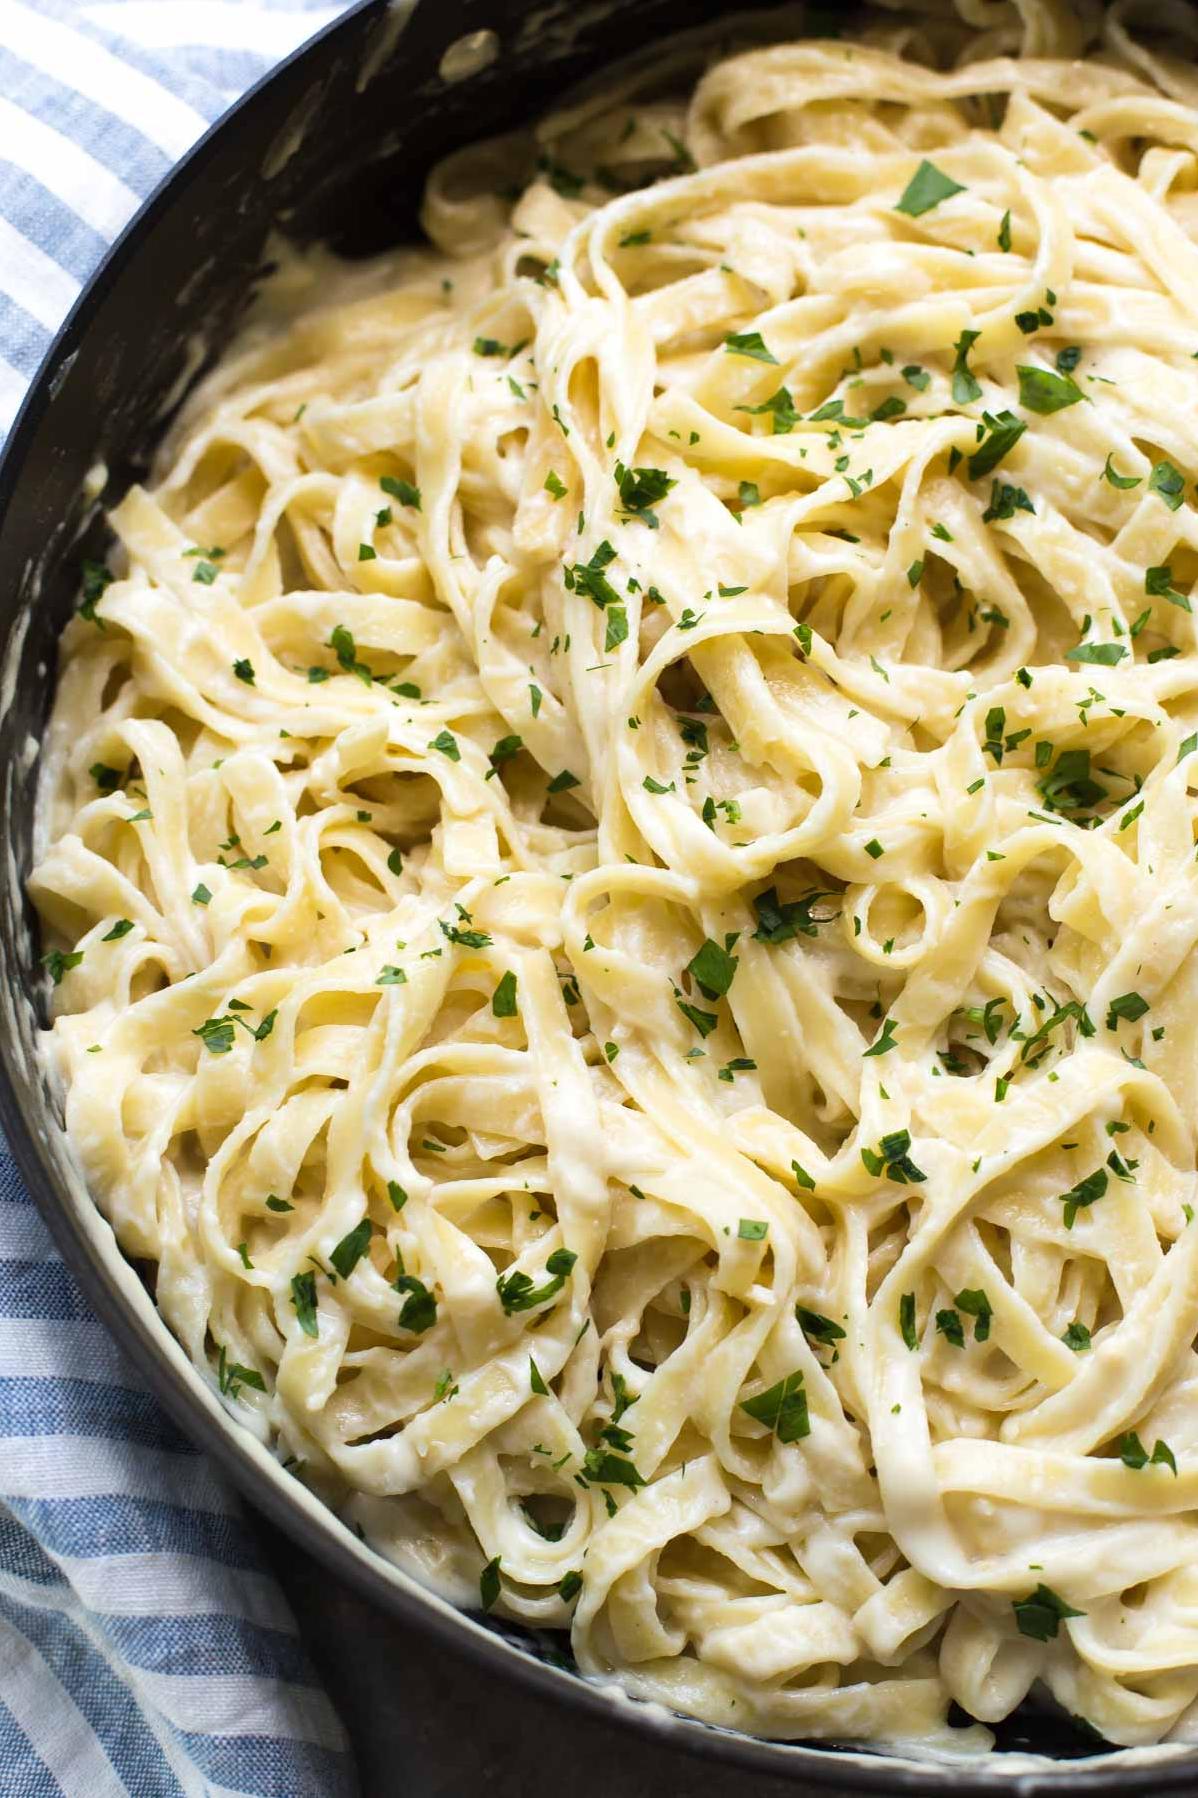  This recipe guarantees a wholesome and hearty pasta experience with no dietary restrictions holding you back.